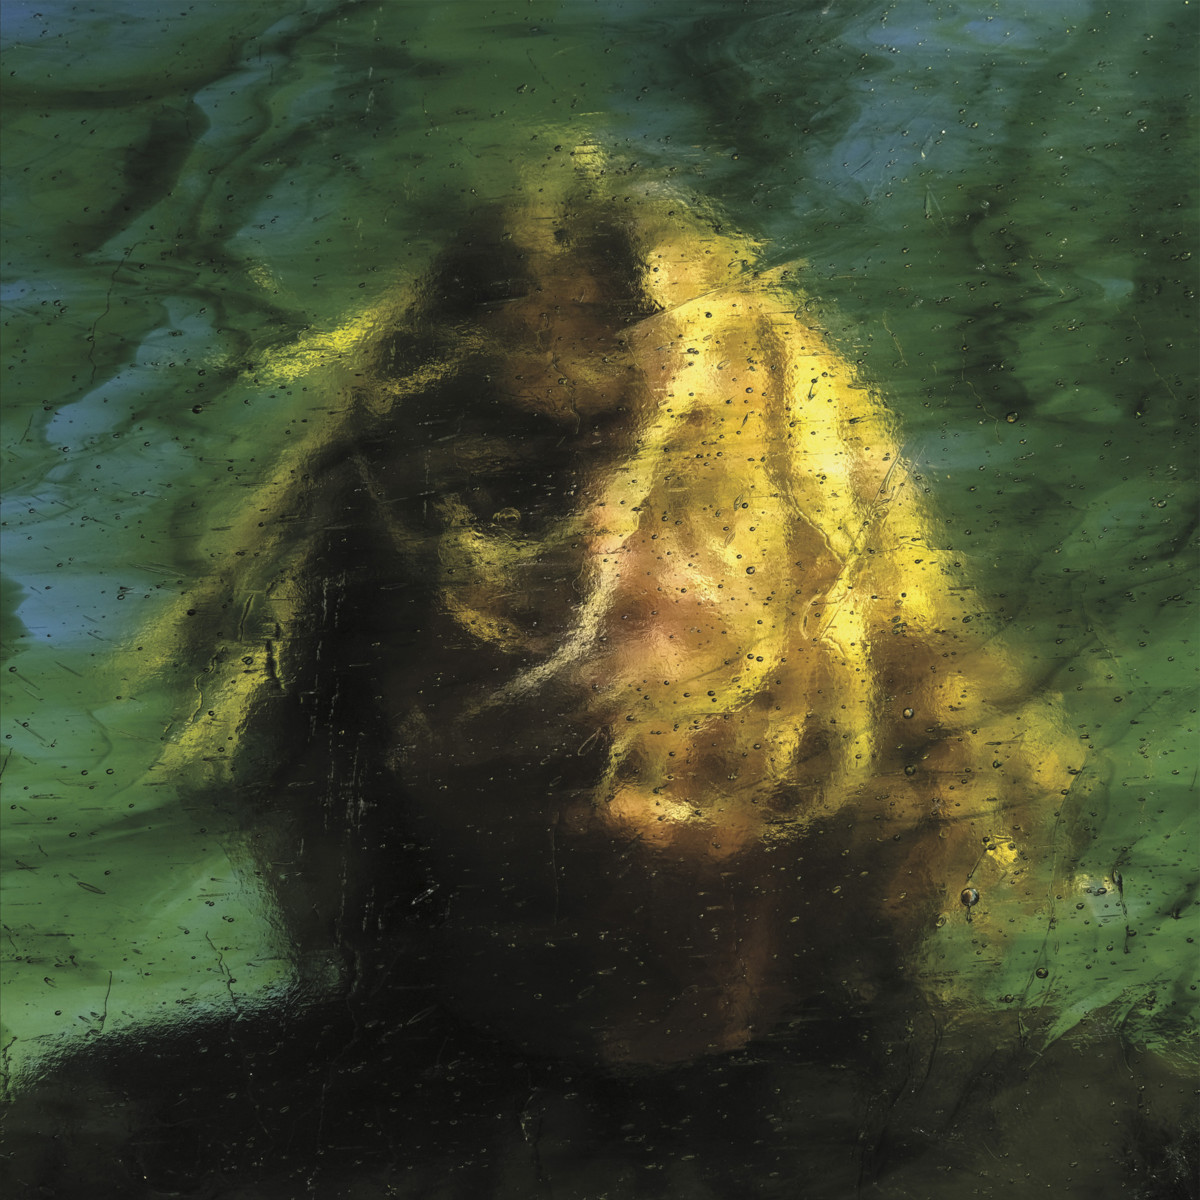 Painting of Ty Segall with face obscured and long hair blowing with green and blue blurred background